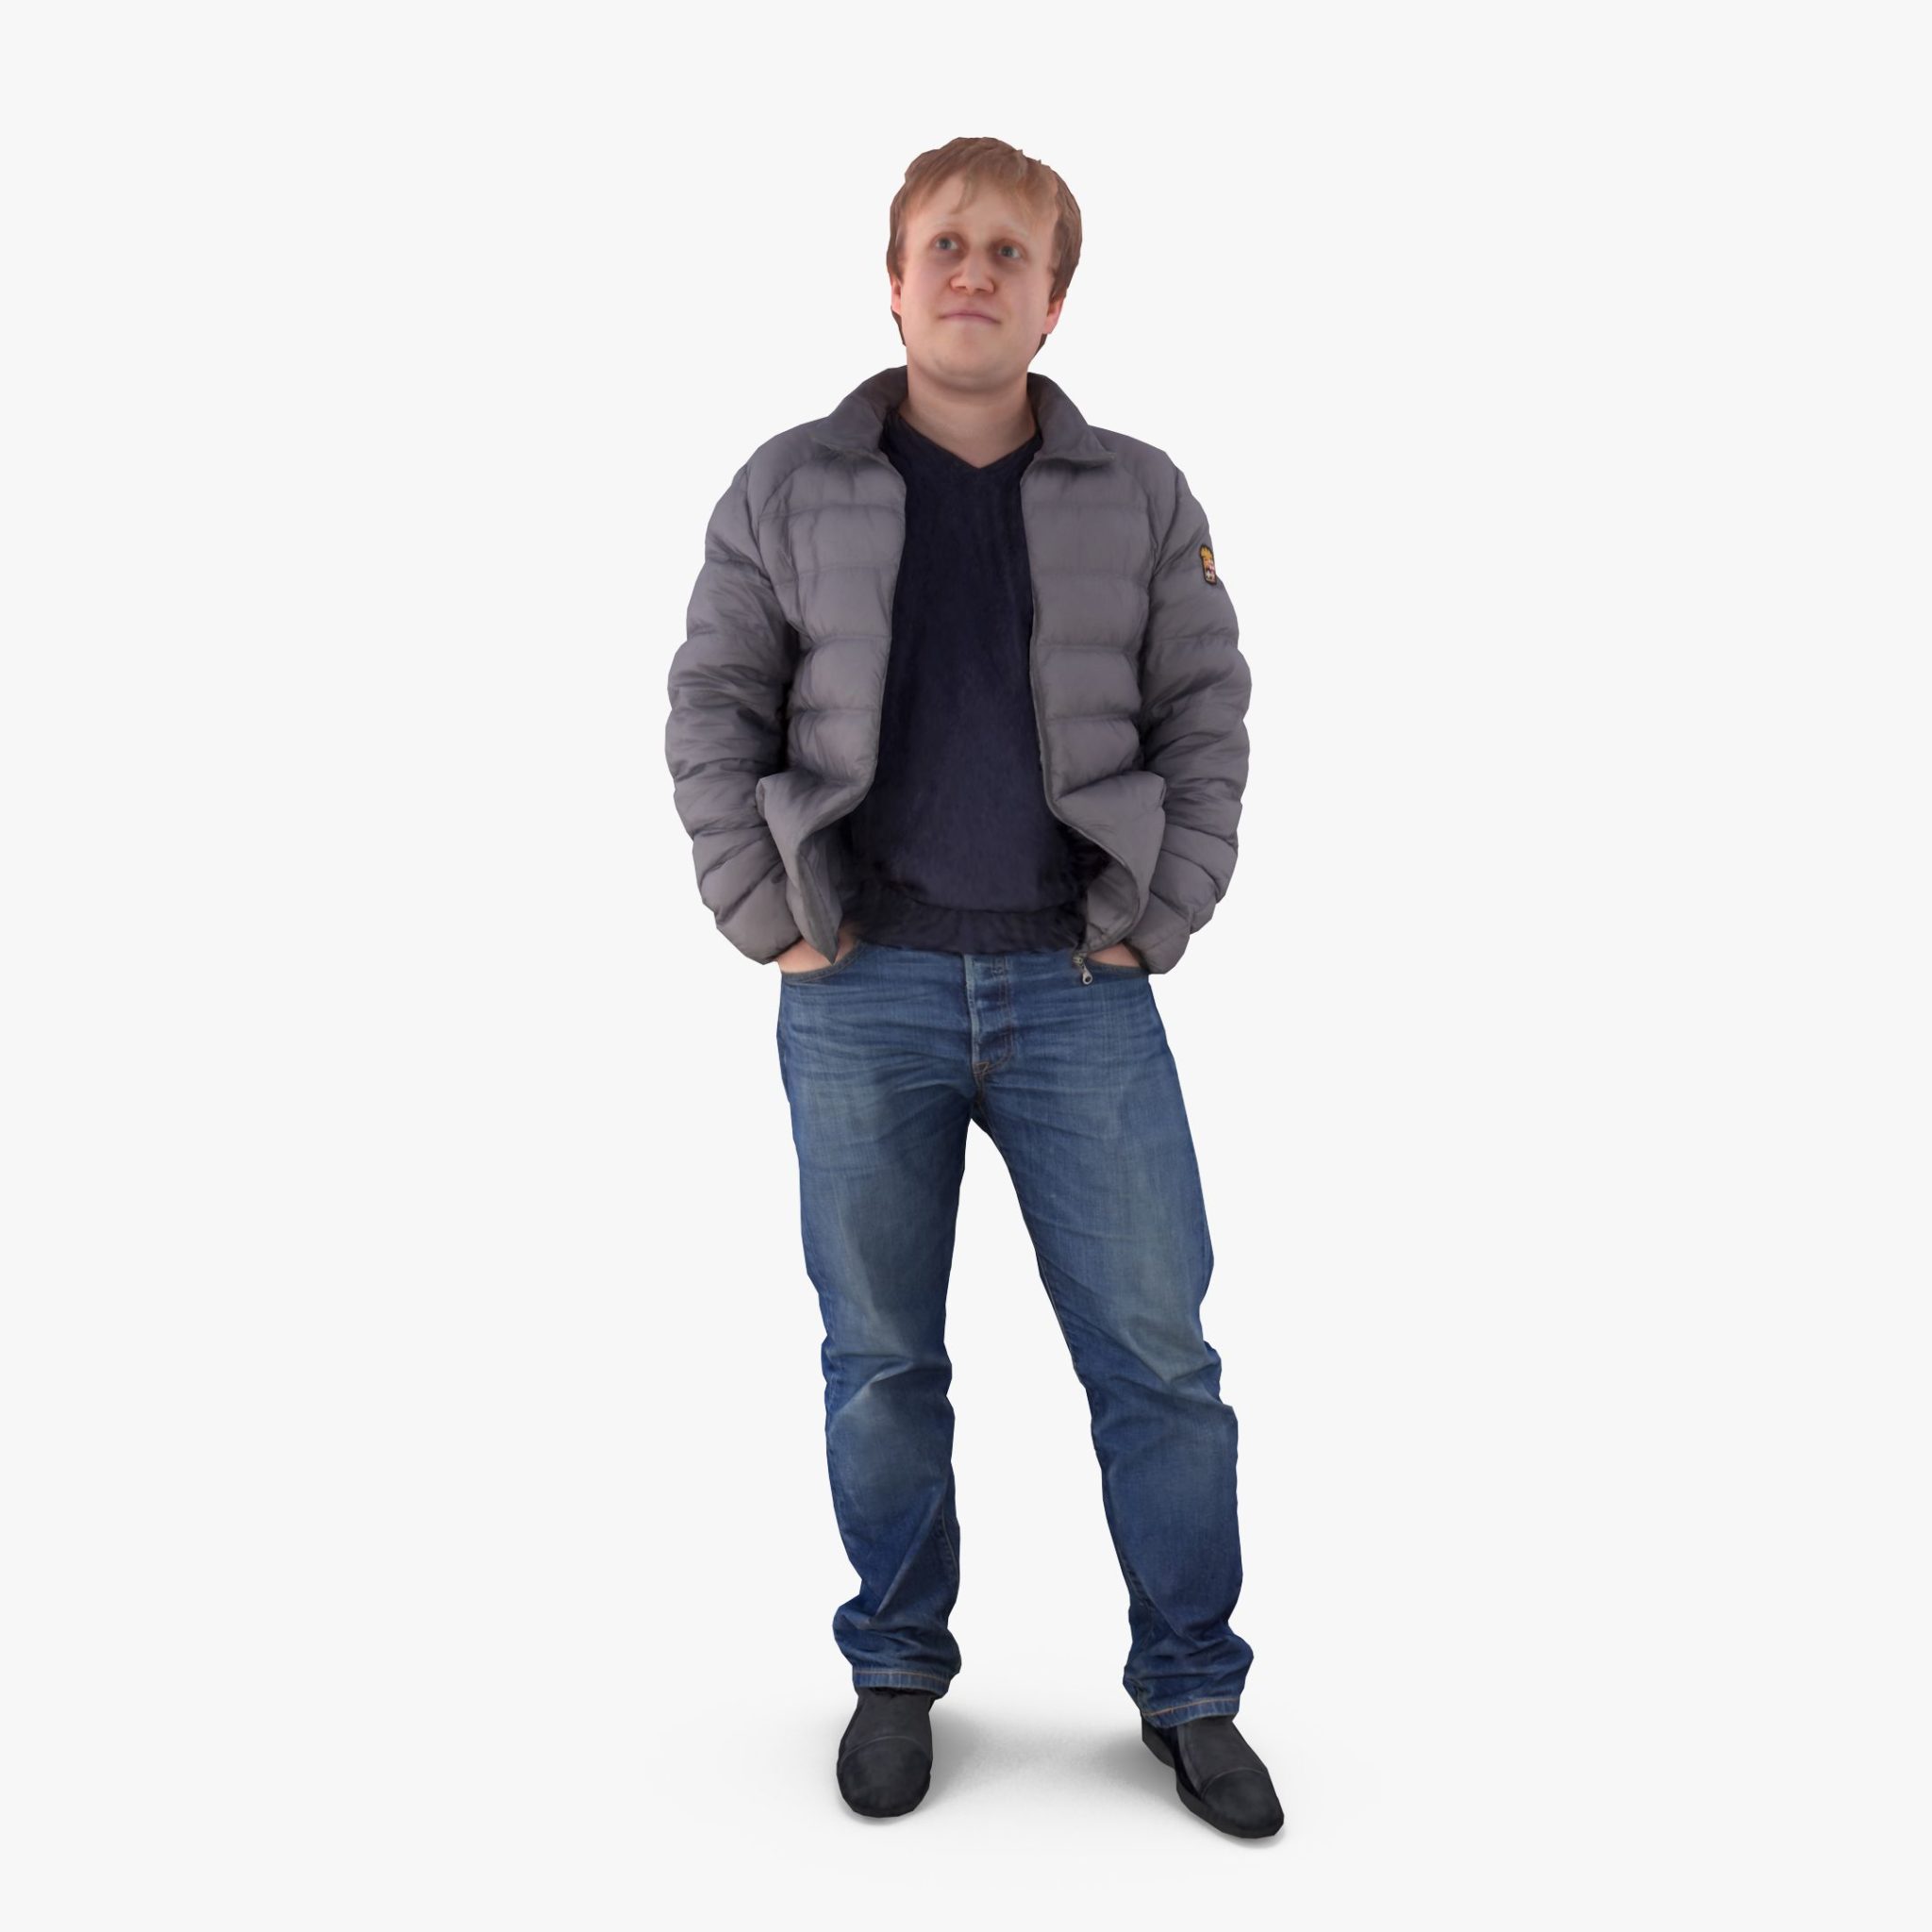 Man in Jacket 3D Model, for download files in 3ds, max, obj, fbx with low poly, game, and VR/AR options. Ready for 3D Printing.